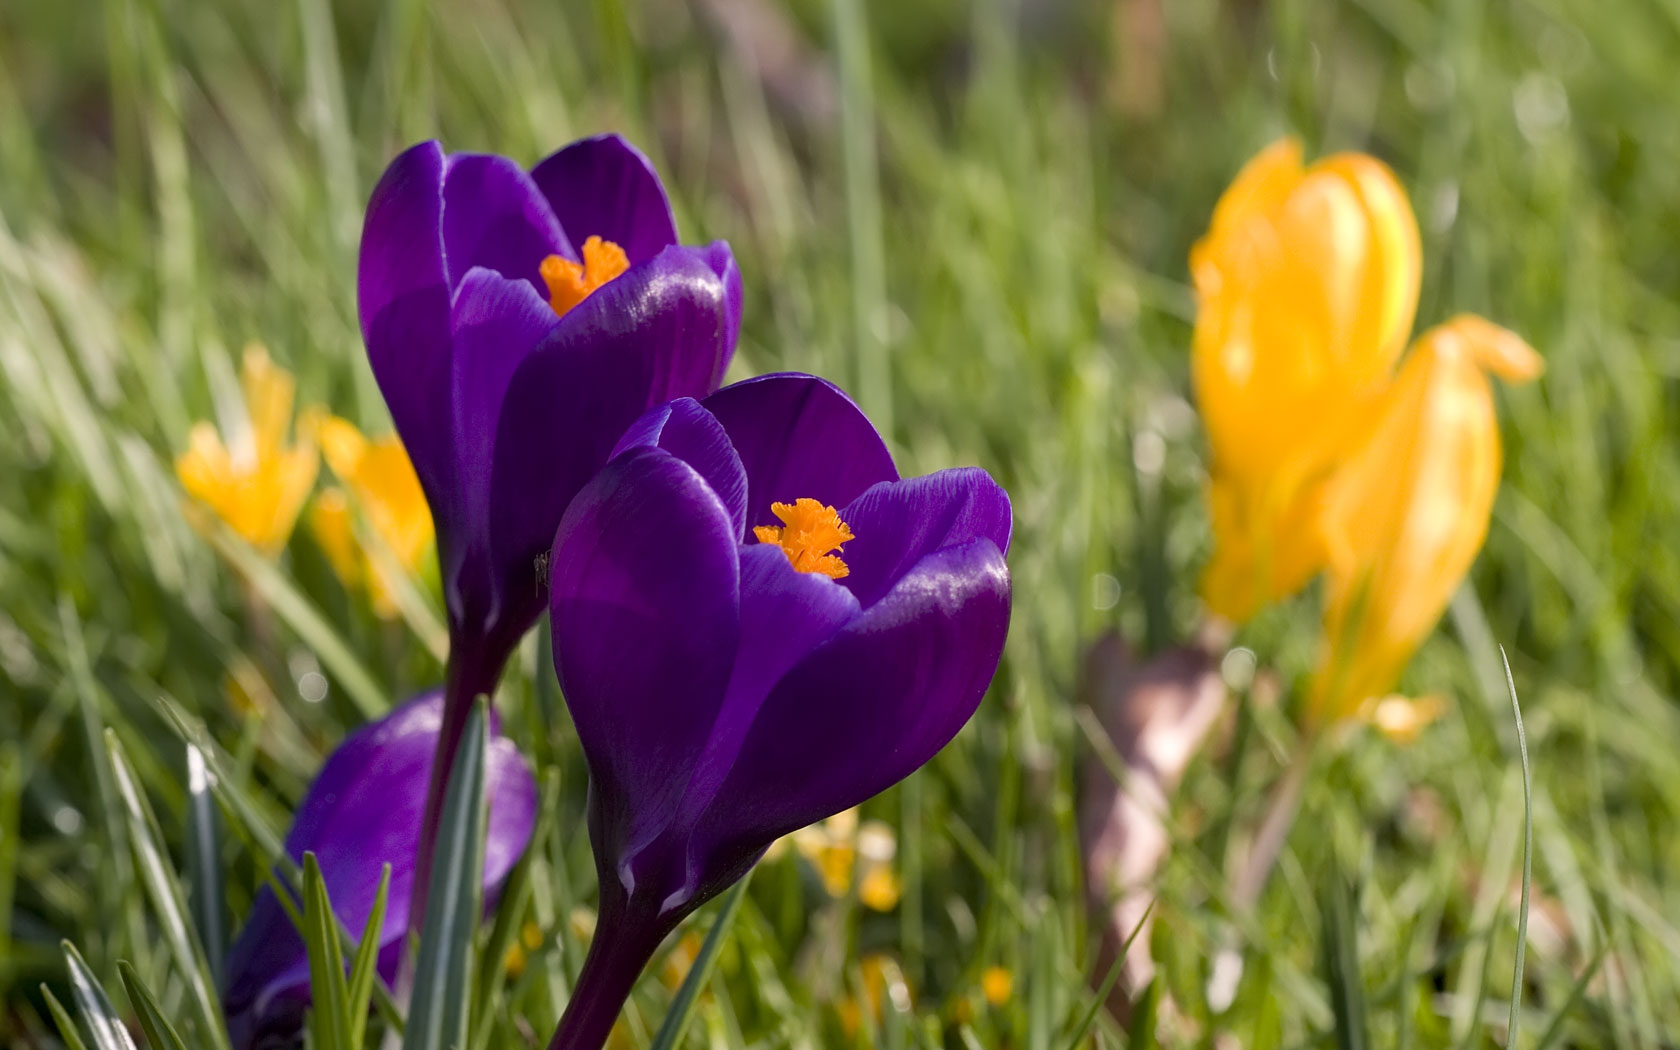  spring wallpapers category of hd wallpapers spring screensavers 1680x1050